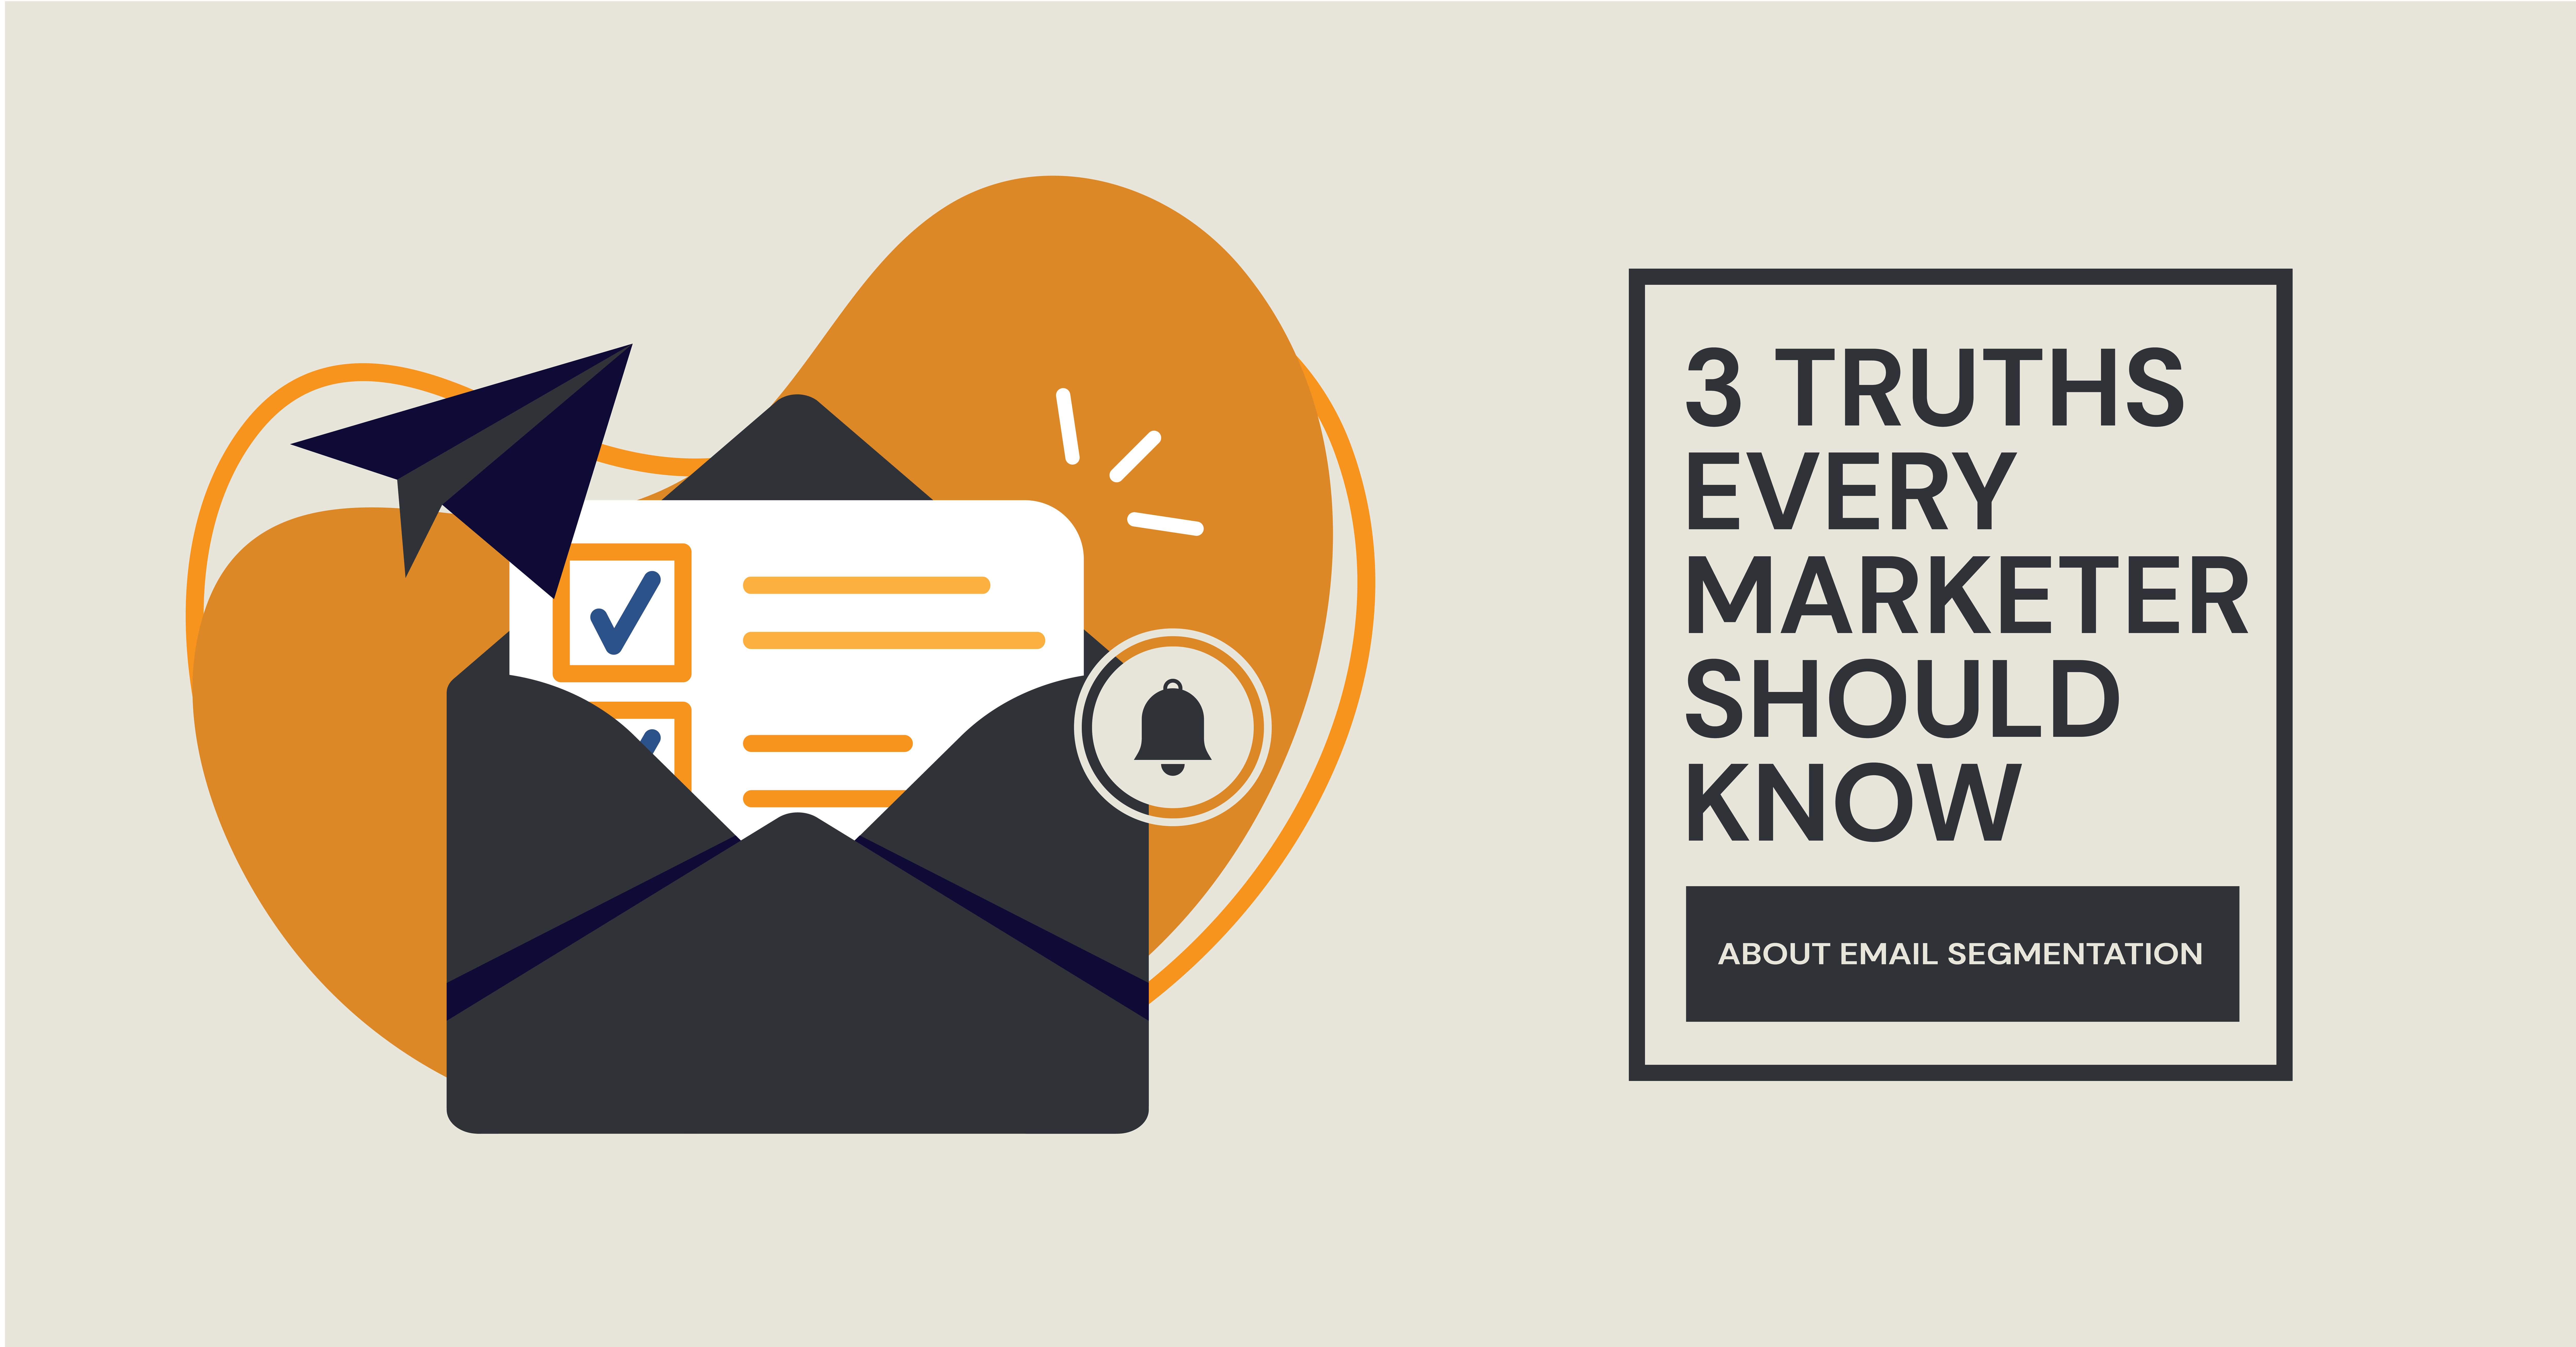 3 truths about email segmentation 